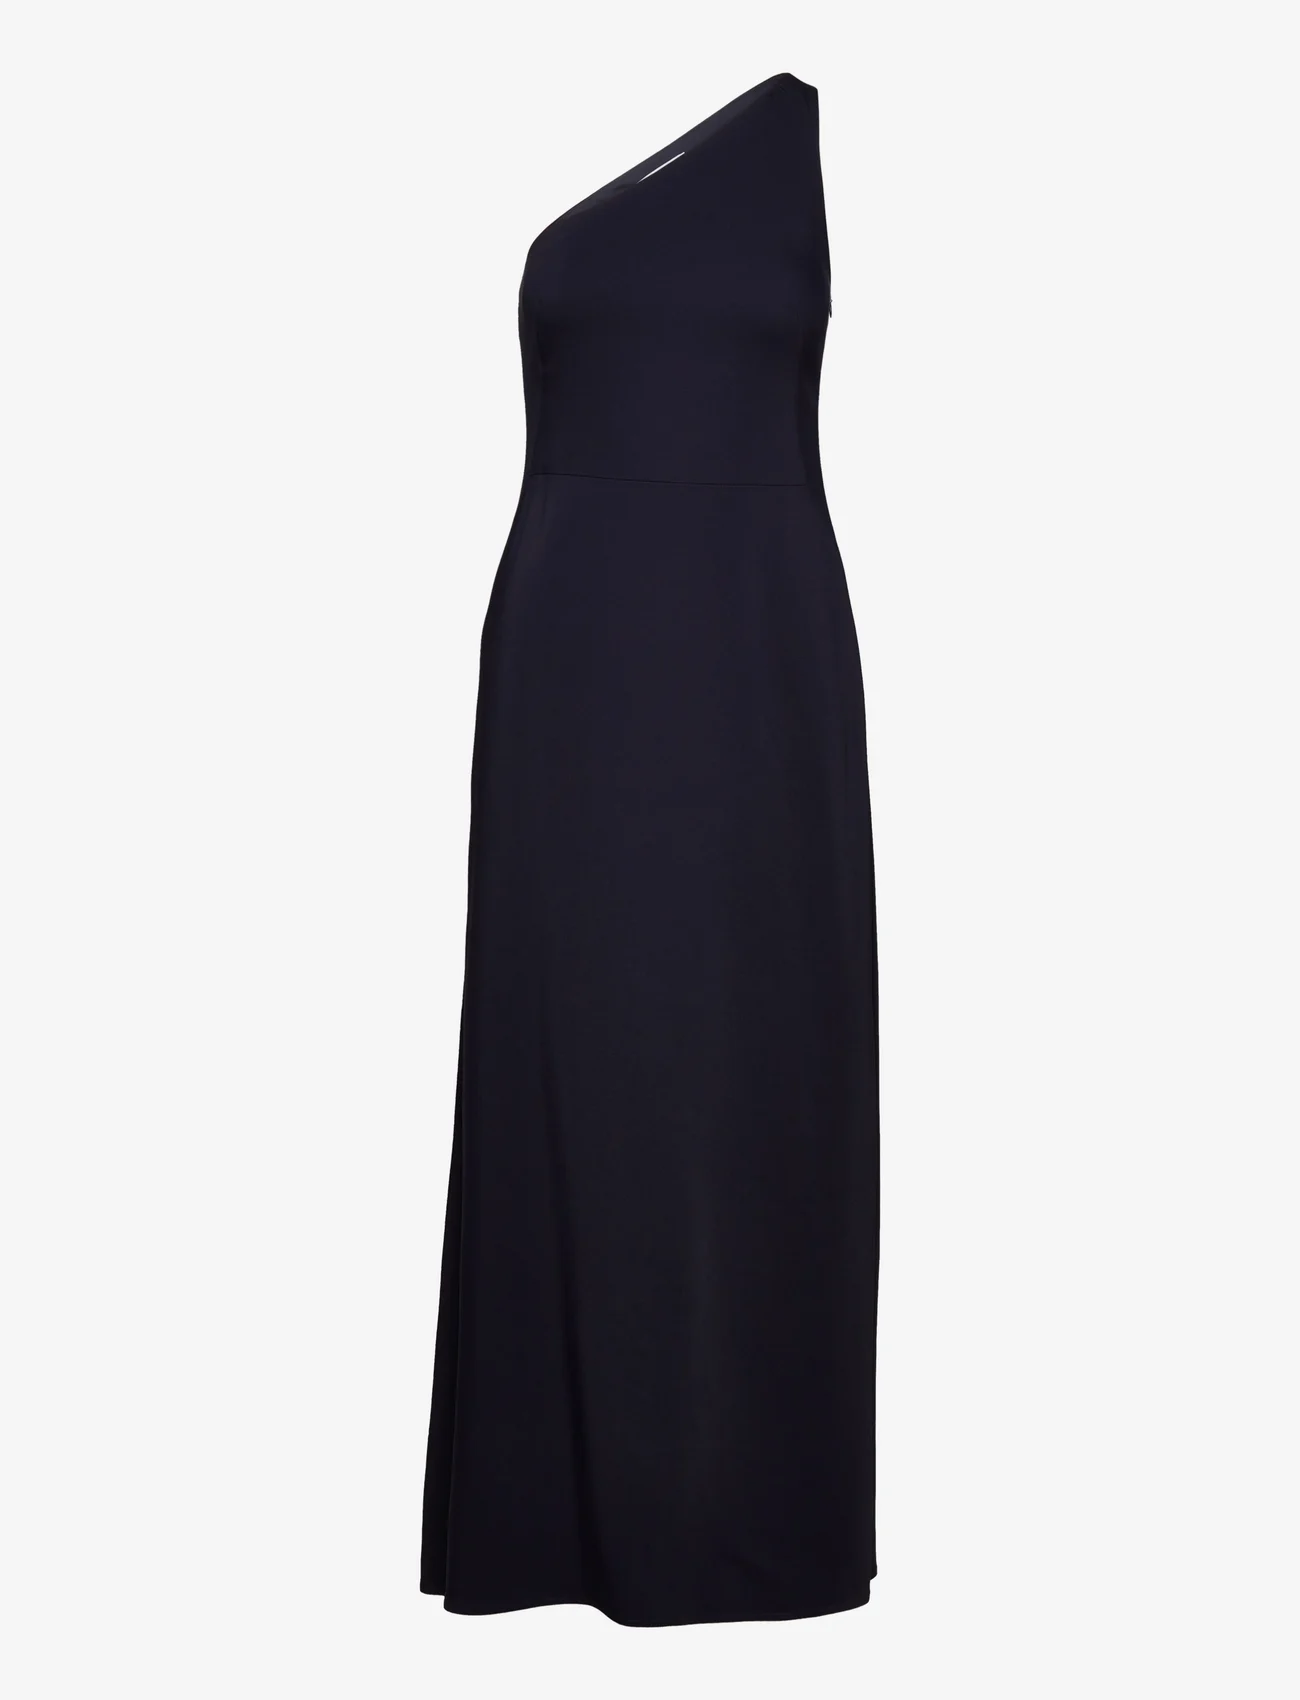 IVY OAK - One Shoulder Ankle Length Dress - party wear at outlet prices - navy blue - 0